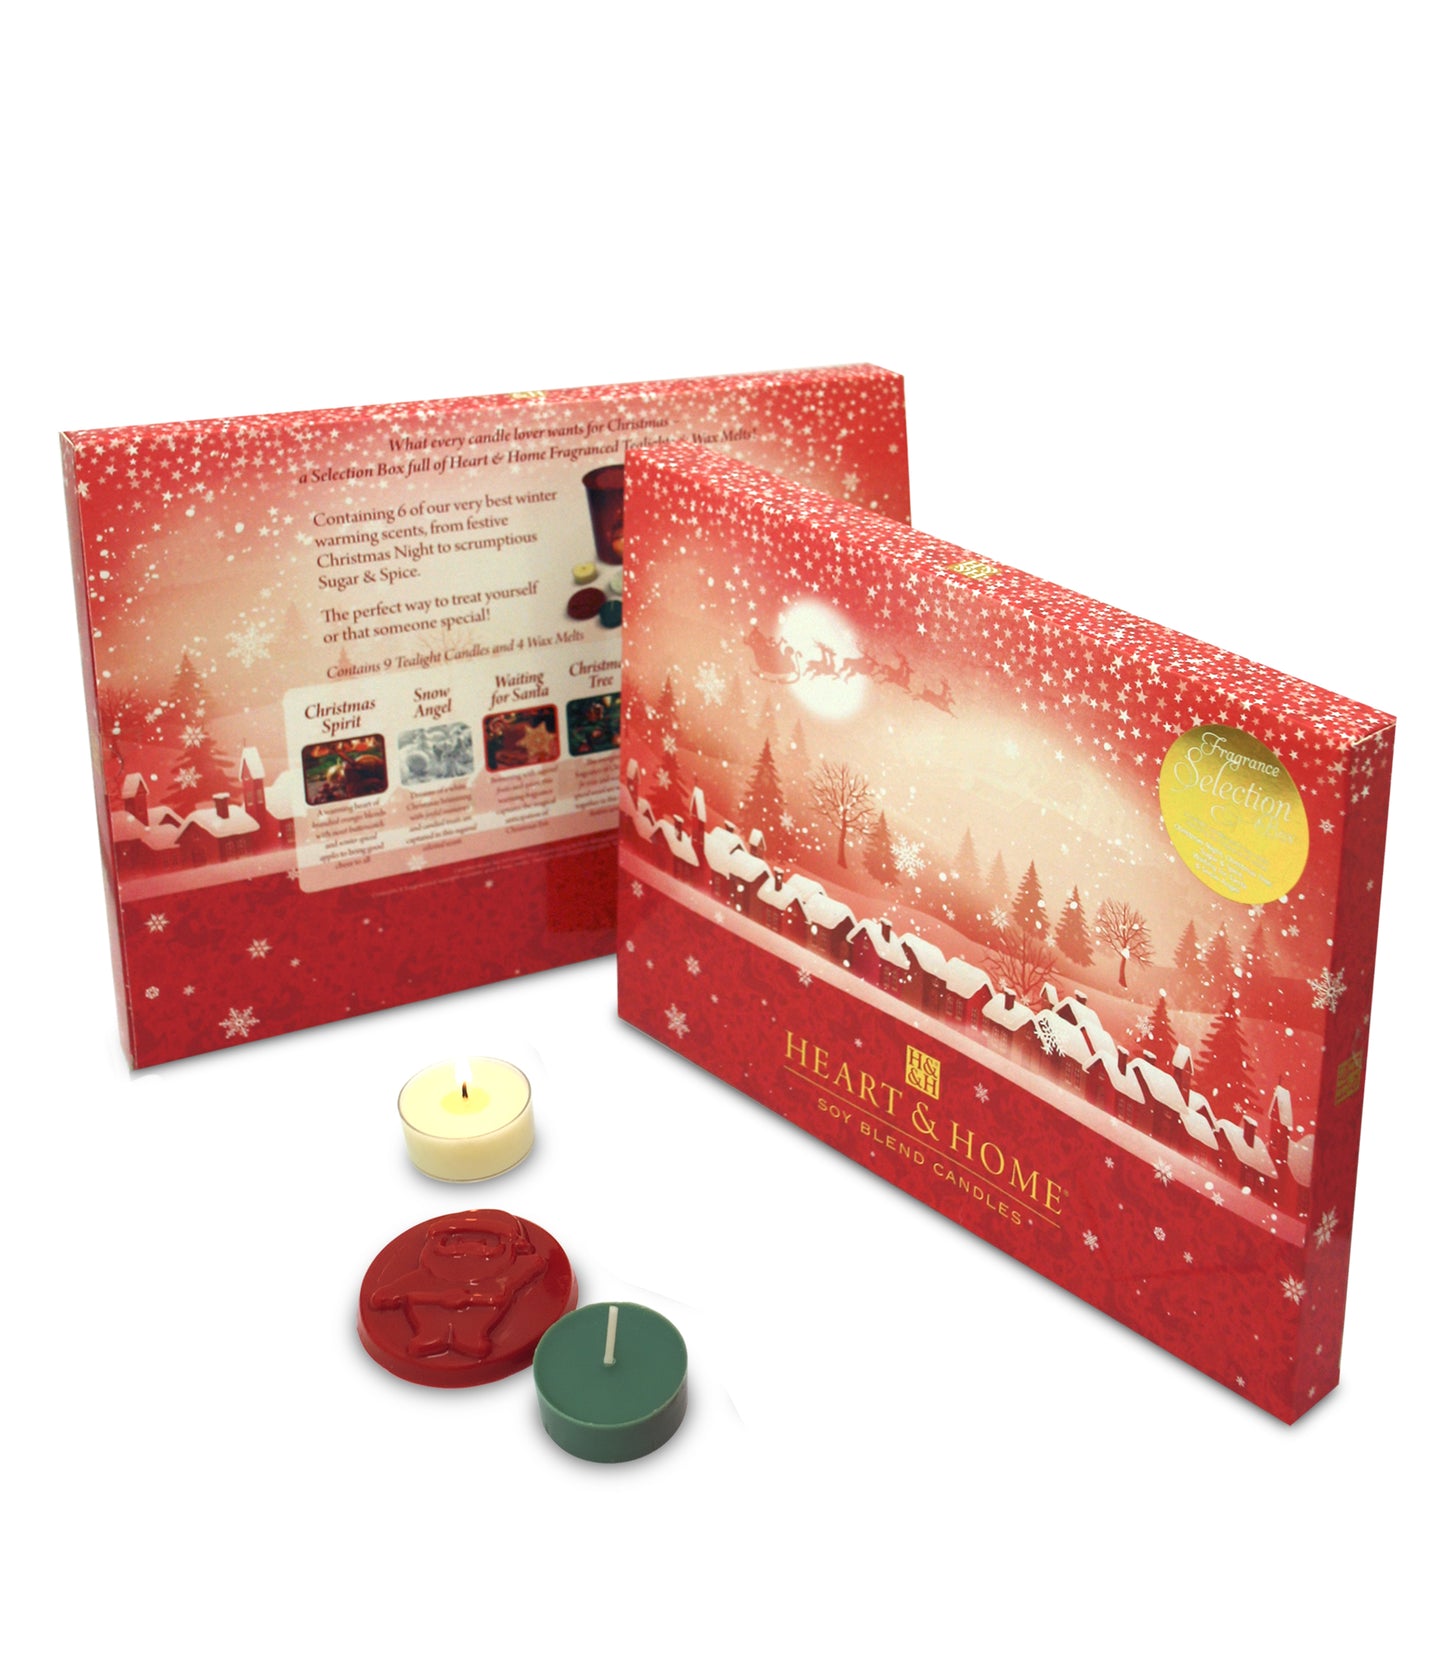 Heart & Home Selection Box Scented Soy Wax Gift Set